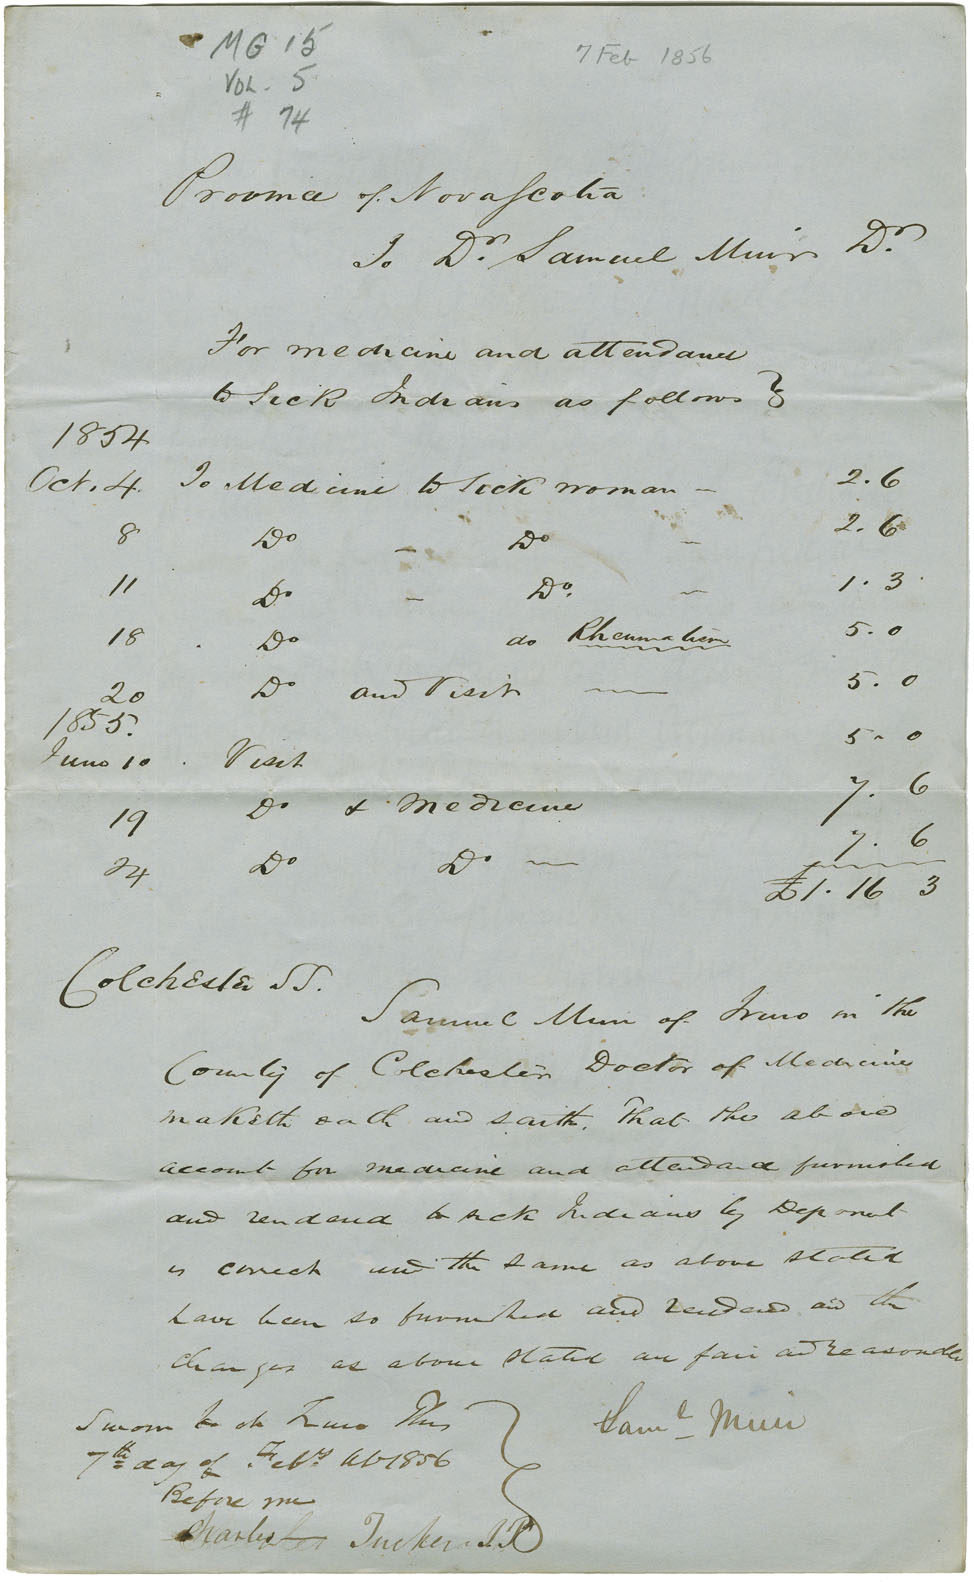 Petition of Dr. Muir for payment for services to Mi'kmaq of Colchester.